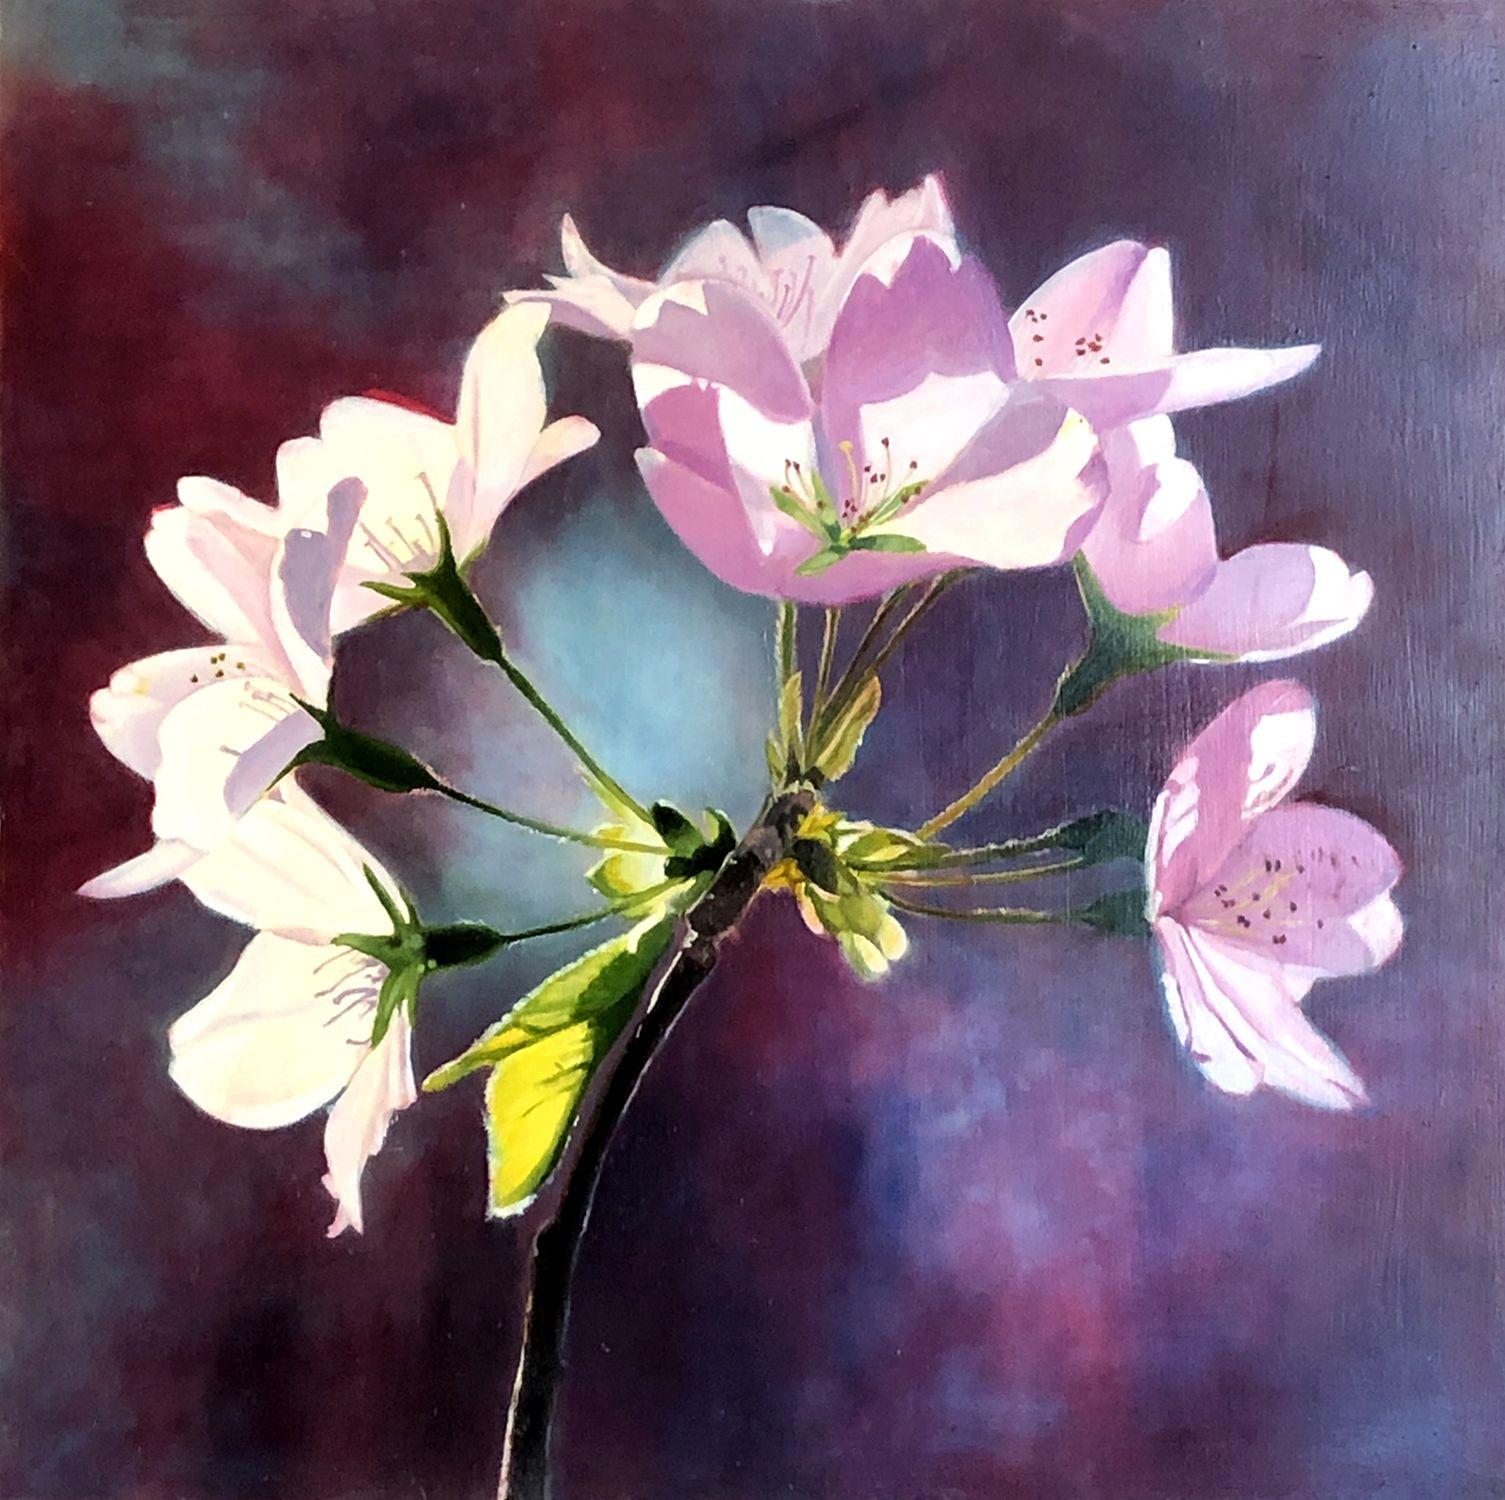 Cherry Blossoms - 2018 - Oil on Cradled Board -16 H x 16 W x .5 Inches    DENNIS CRAYON REALIST CONTEMPORARY REALISM  I've earned a bachelor's degree in graphic design from the State University of New York and later earned a diploma from the School